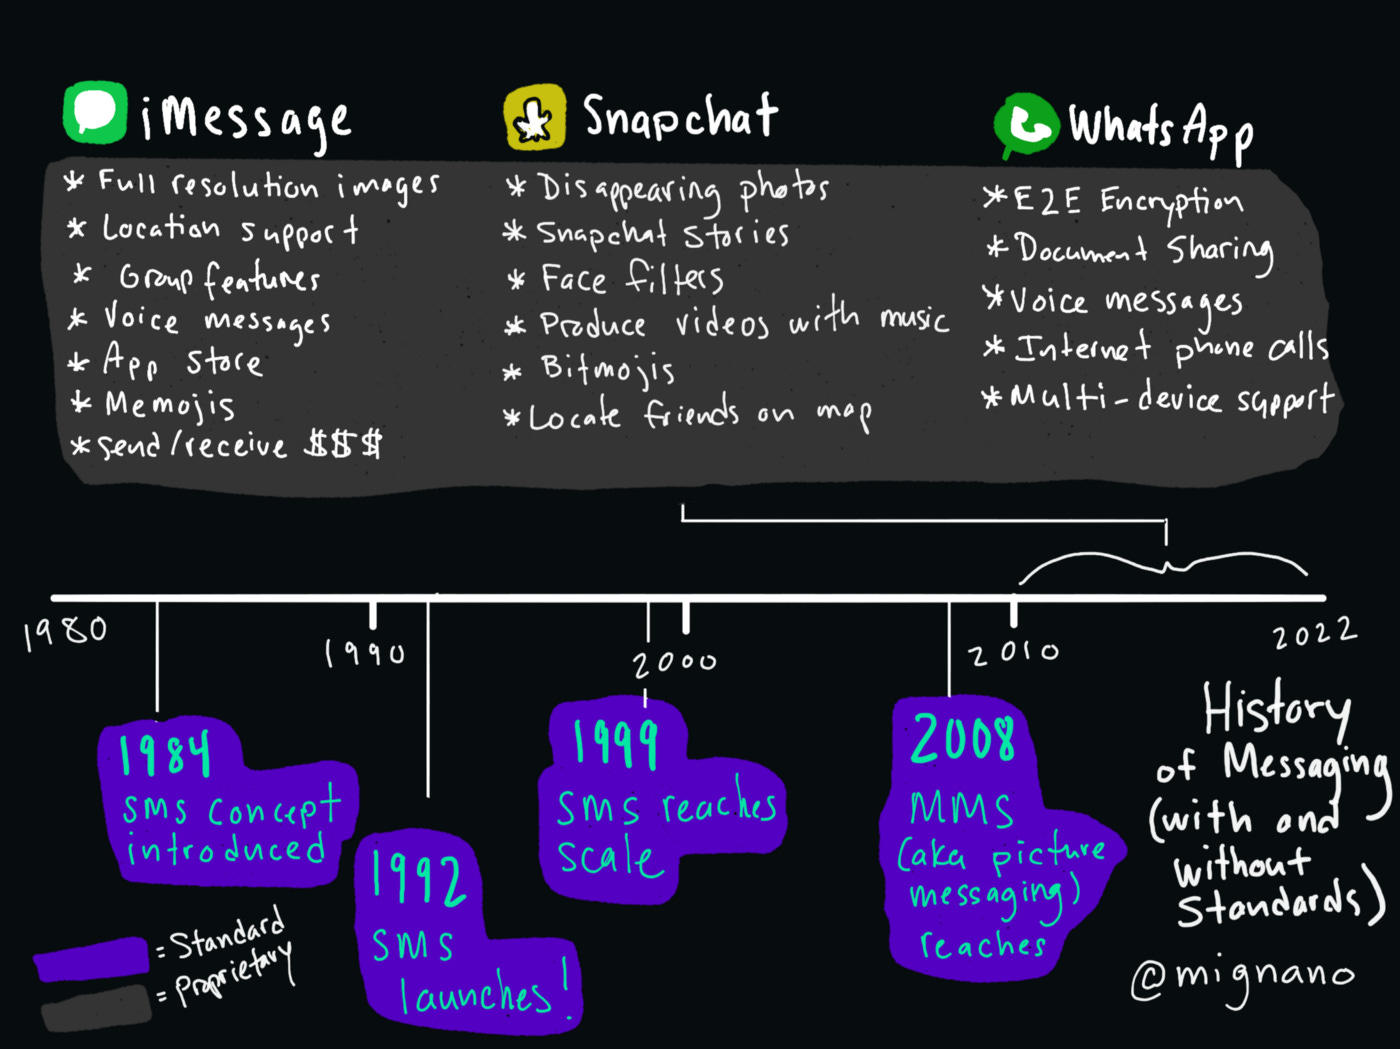 A timeline showing the history of messaging, both with and without standards, by Michael Mignano